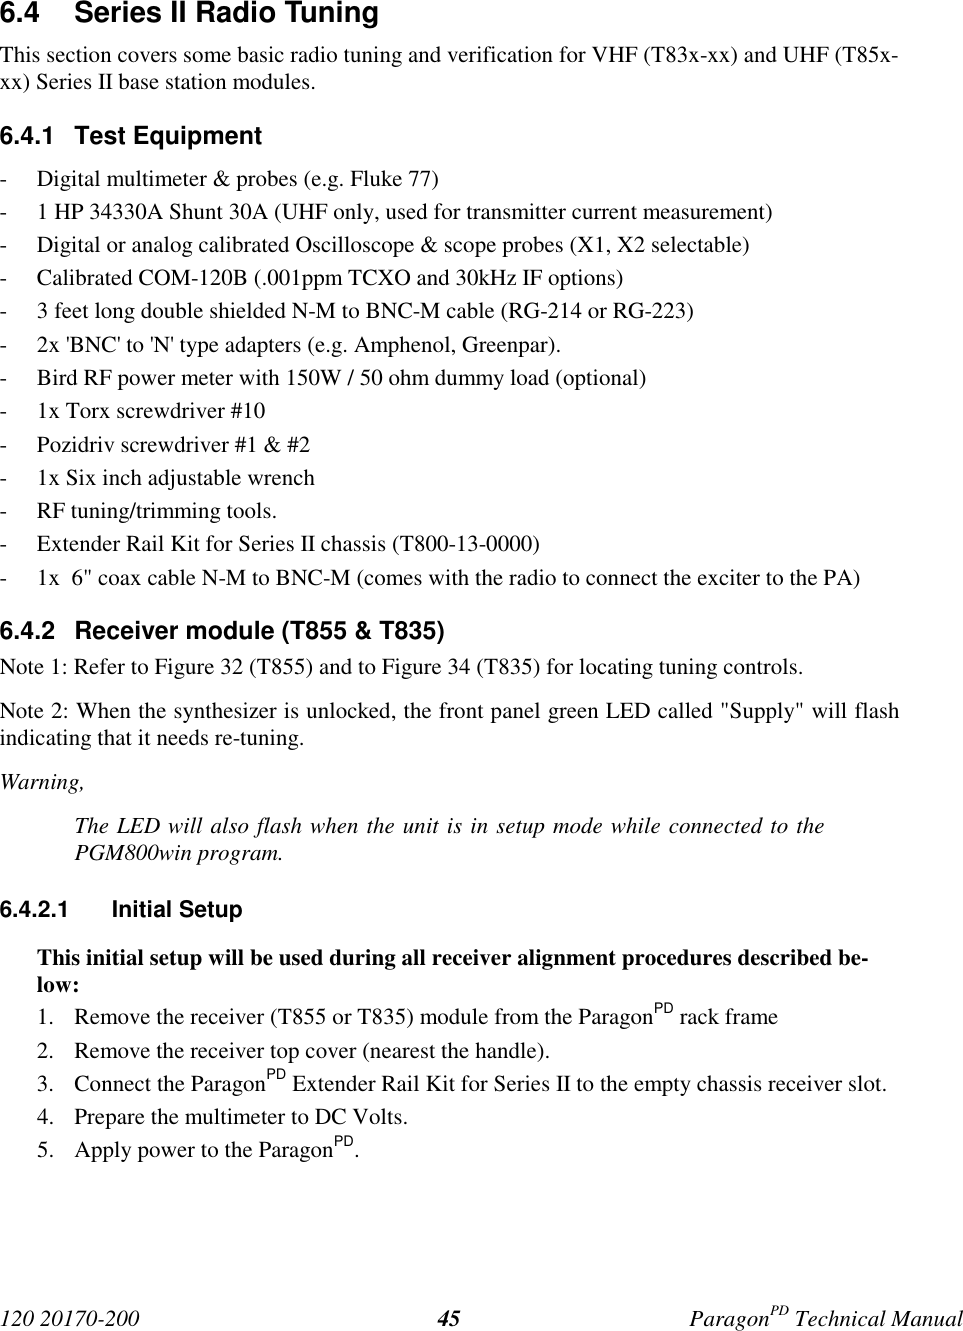 120 20170-200 ParagonPD Technical Manual456.4  Series II Radio TuningThis section covers some basic radio tuning and verification for VHF (T83x-xx) and UHF (T85x-xx) Series II base station modules.6.4.1 Test Equipment- Digital multimeter &amp; probes (e.g. Fluke 77)- 1 HP 34330A Shunt 30A (UHF only, used for transmitter current measurement)- Digital or analog calibrated Oscilloscope &amp; scope probes (X1, X2 selectable)- Calibrated COM-120B (.001ppm TCXO and 30kHz IF options)- 3 feet long double shielded N-M to BNC-M cable (RG-214 or RG-223)- 2x &apos;BNC&apos; to &apos;N&apos; type adapters (e.g. Amphenol, Greenpar).- Bird RF power meter with 150W / 50 ohm dummy load (optional)- 1x Torx screwdriver #10- Pozidriv screwdriver #1 &amp; #2- 1x Six inch adjustable wrench- RF tuning/trimming tools.- Extender Rail Kit for Series II chassis (T800-13-0000)- 1x  6&quot; coax cable N-M to BNC-M (comes with the radio to connect the exciter to the PA)6.4.2  Receiver module (T855 &amp; T835)Note 1: Refer to Figure 32 (T855) and to Figure 34 (T835) for locating tuning controls.Note 2: When the synthesizer is unlocked, the front panel green LED called &quot;Supply&quot; will flashindicating that it needs re-tuning.Warning,The LED will also flash when the unit is in setup mode while connected to thePGM800win program.6.4.2.1 Initial SetupThis initial setup will be used during all receiver alignment procedures described be-low:1. Remove the receiver (T855 or T835) module from the ParagonPD rack frame2. Remove the receiver top cover (nearest the handle).3. Connect the ParagonPD Extender Rail Kit for Series II to the empty chassis receiver slot.4. Prepare the multimeter to DC Volts.5. Apply power to the ParagonPD.